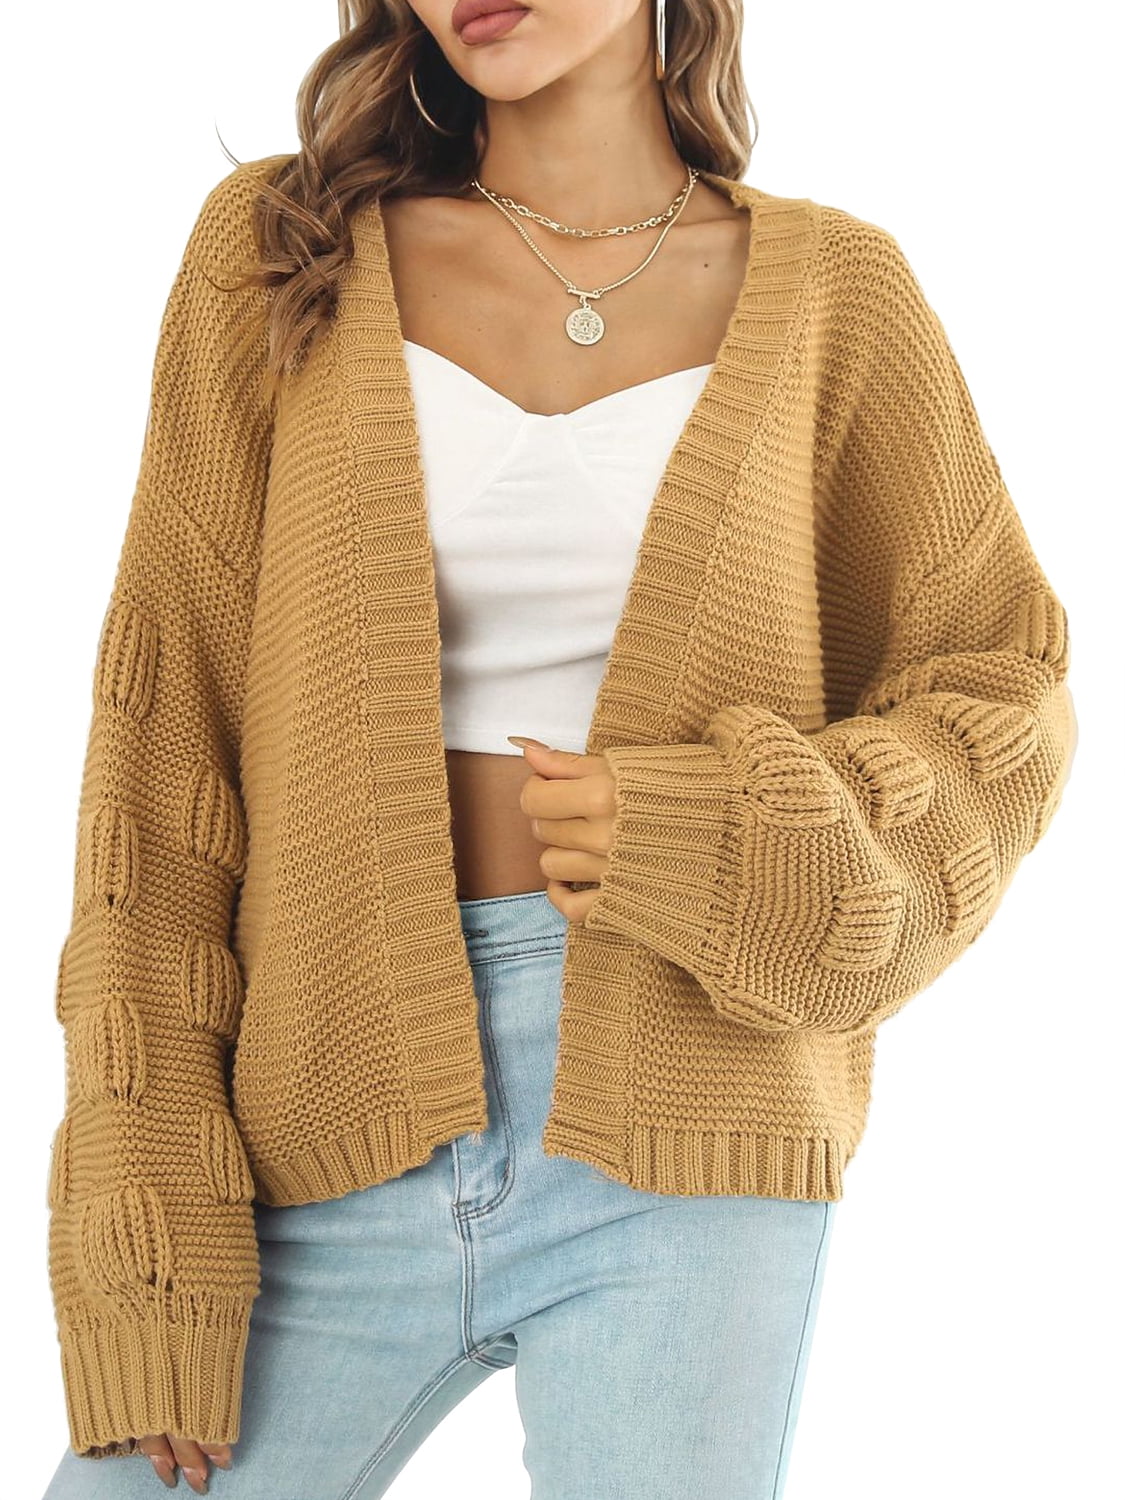 Coat Sweater Duster Cardigans For Women Knitted Cardigans White Turtleneck  Sweater under 20 dollar items  warehouse sale clearance returns  pallets 1 items one dollar items only for women at  Women's